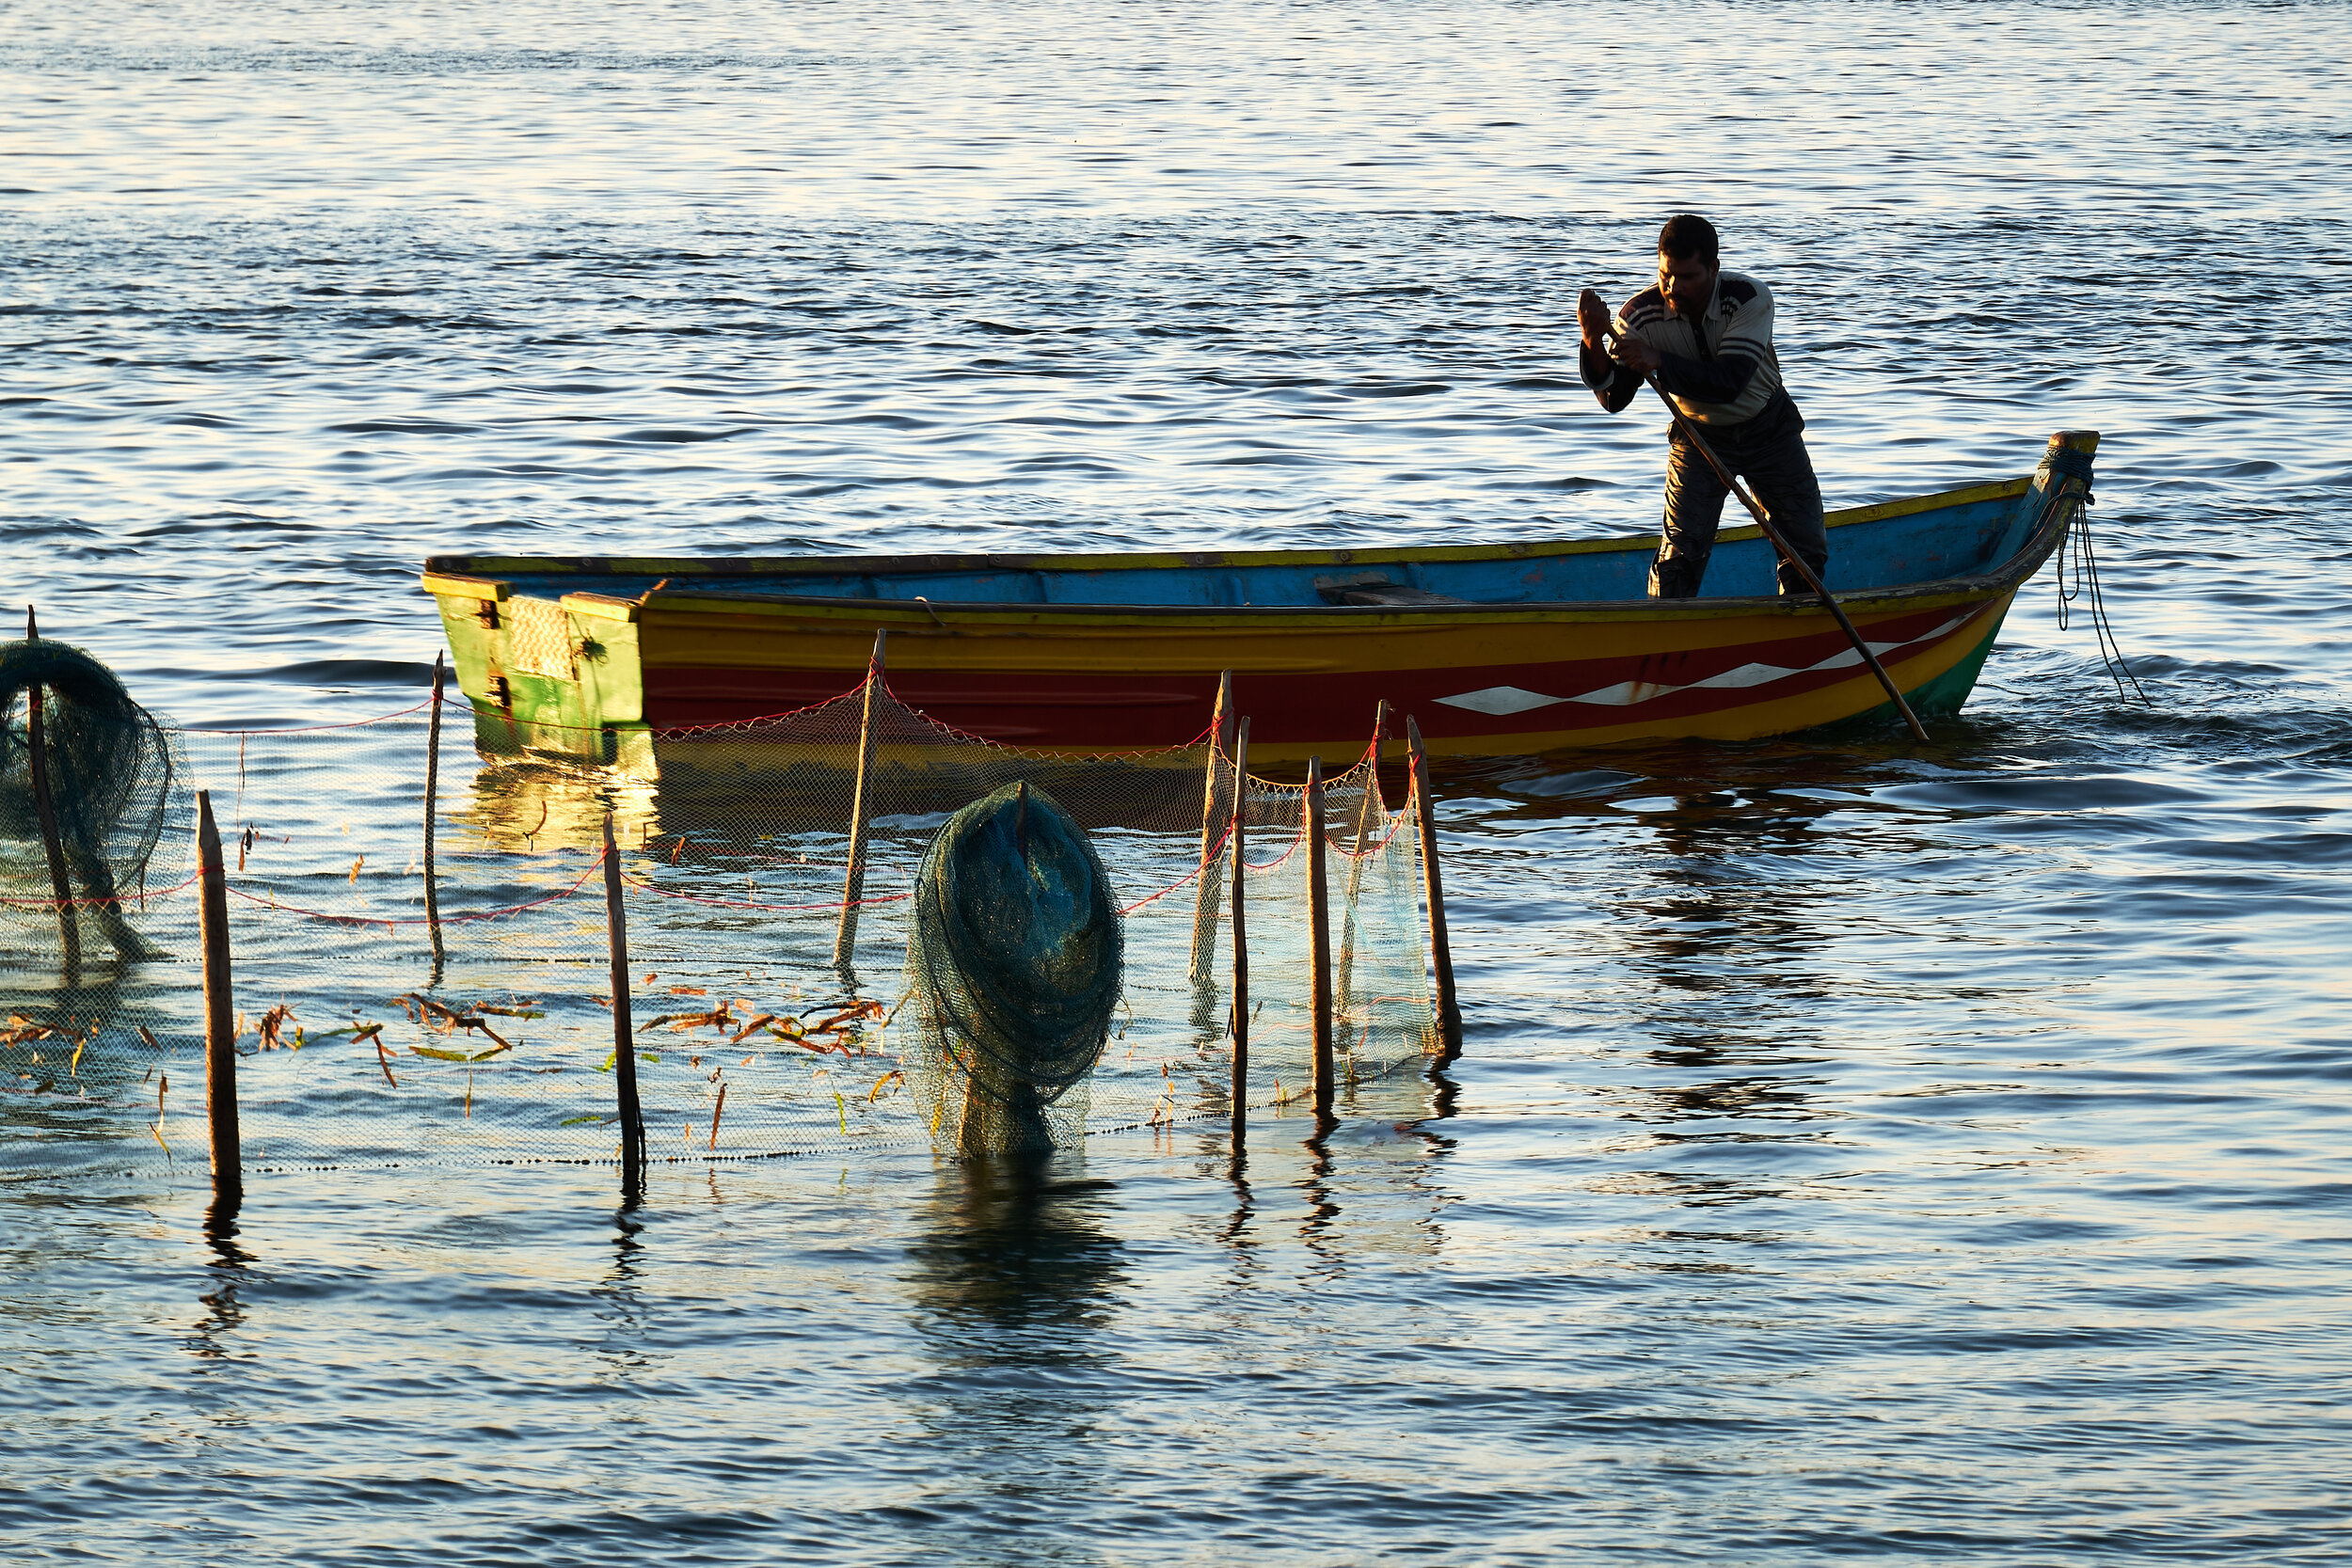   A fisherman entering the fishing trap in the morning to collect the catch from the last night.  